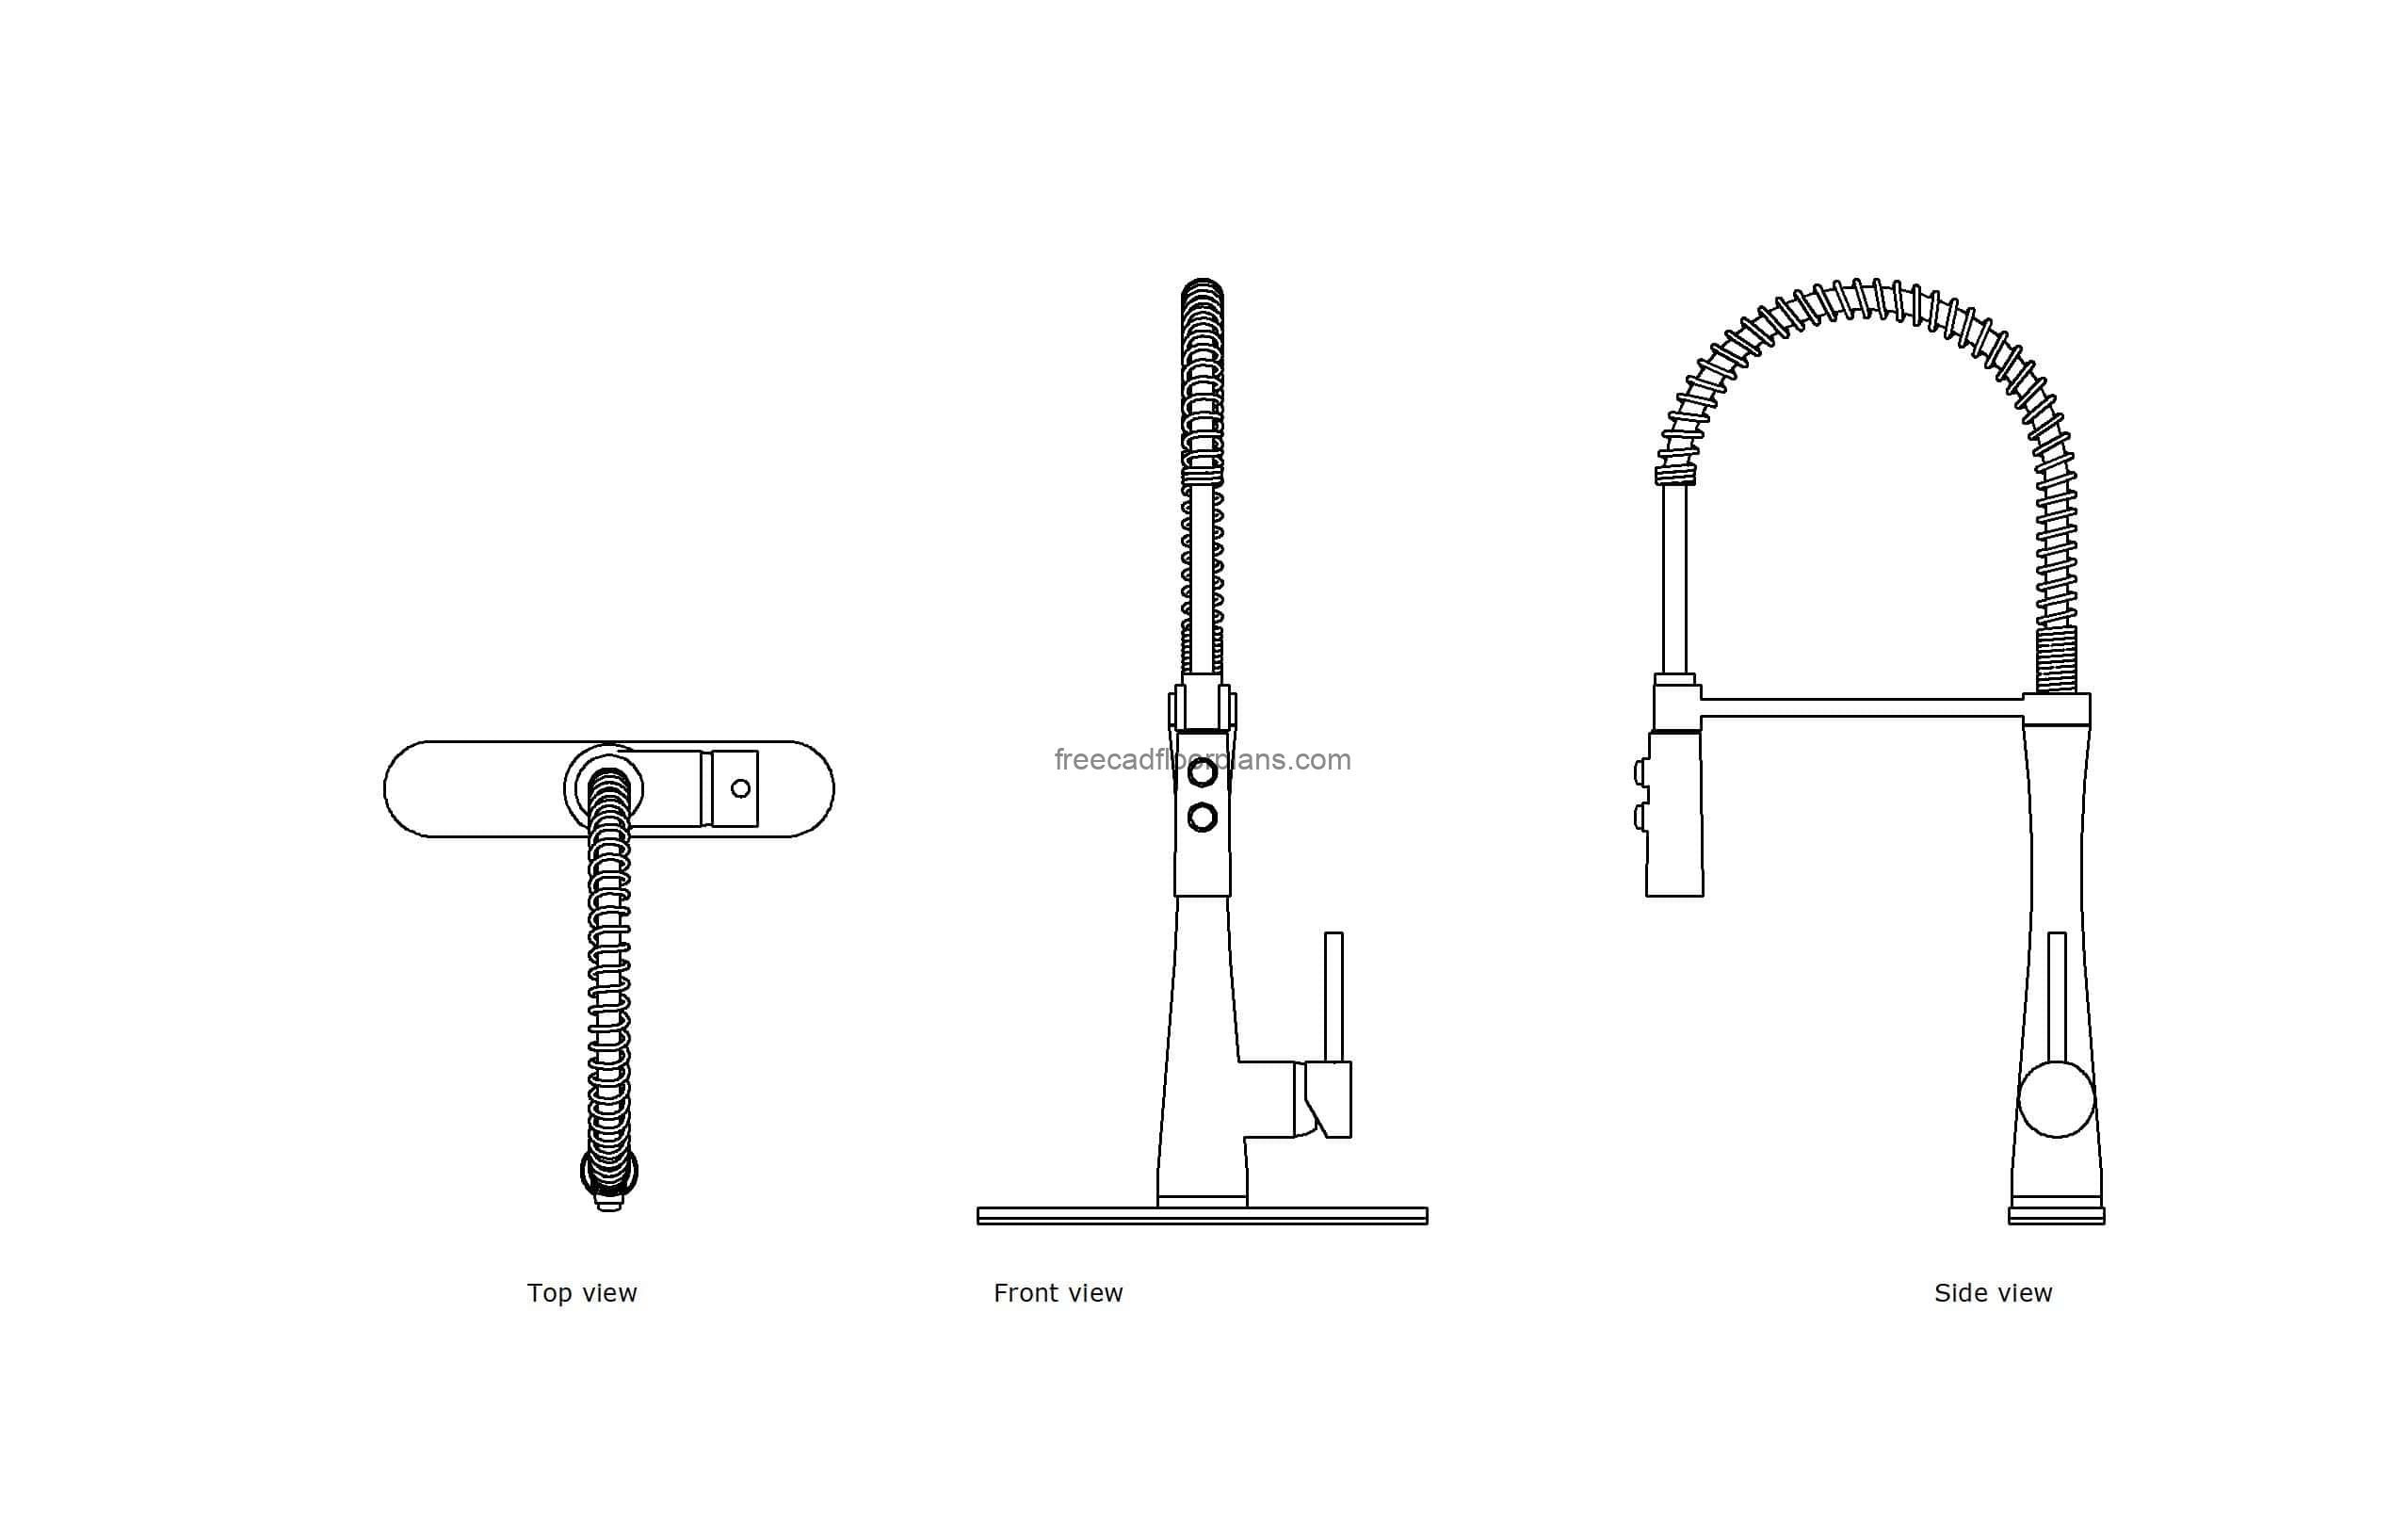 autocad drawing of a pull down kitchen faucet, plan and elevation 2d views, dwg file free for download